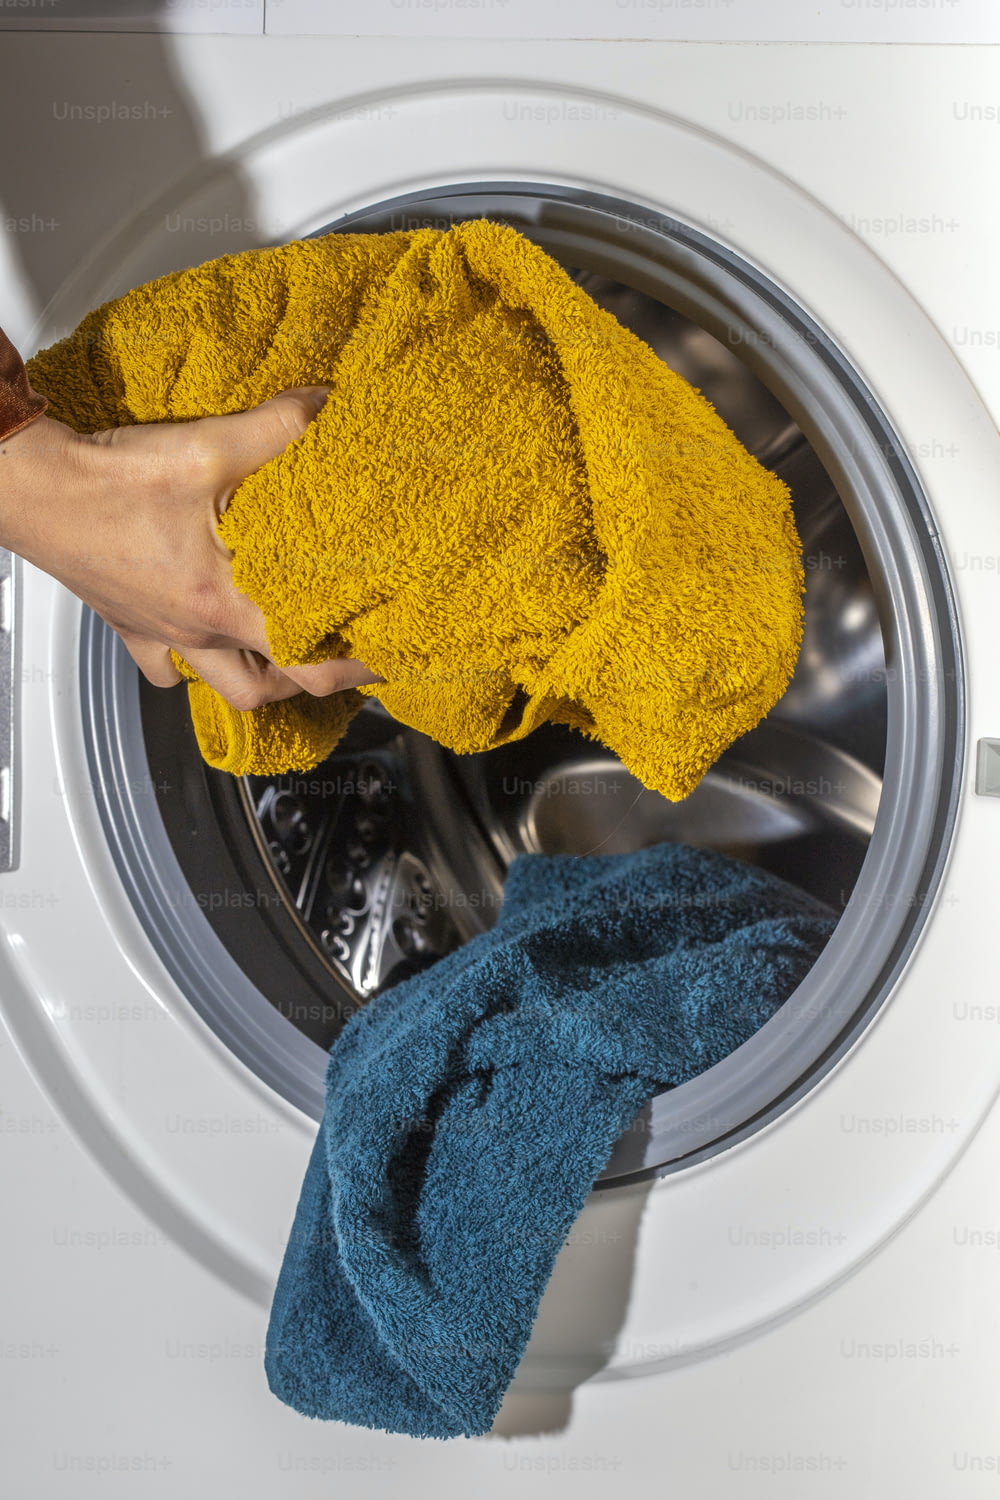 a person holding a yellow towel next to a washing machine